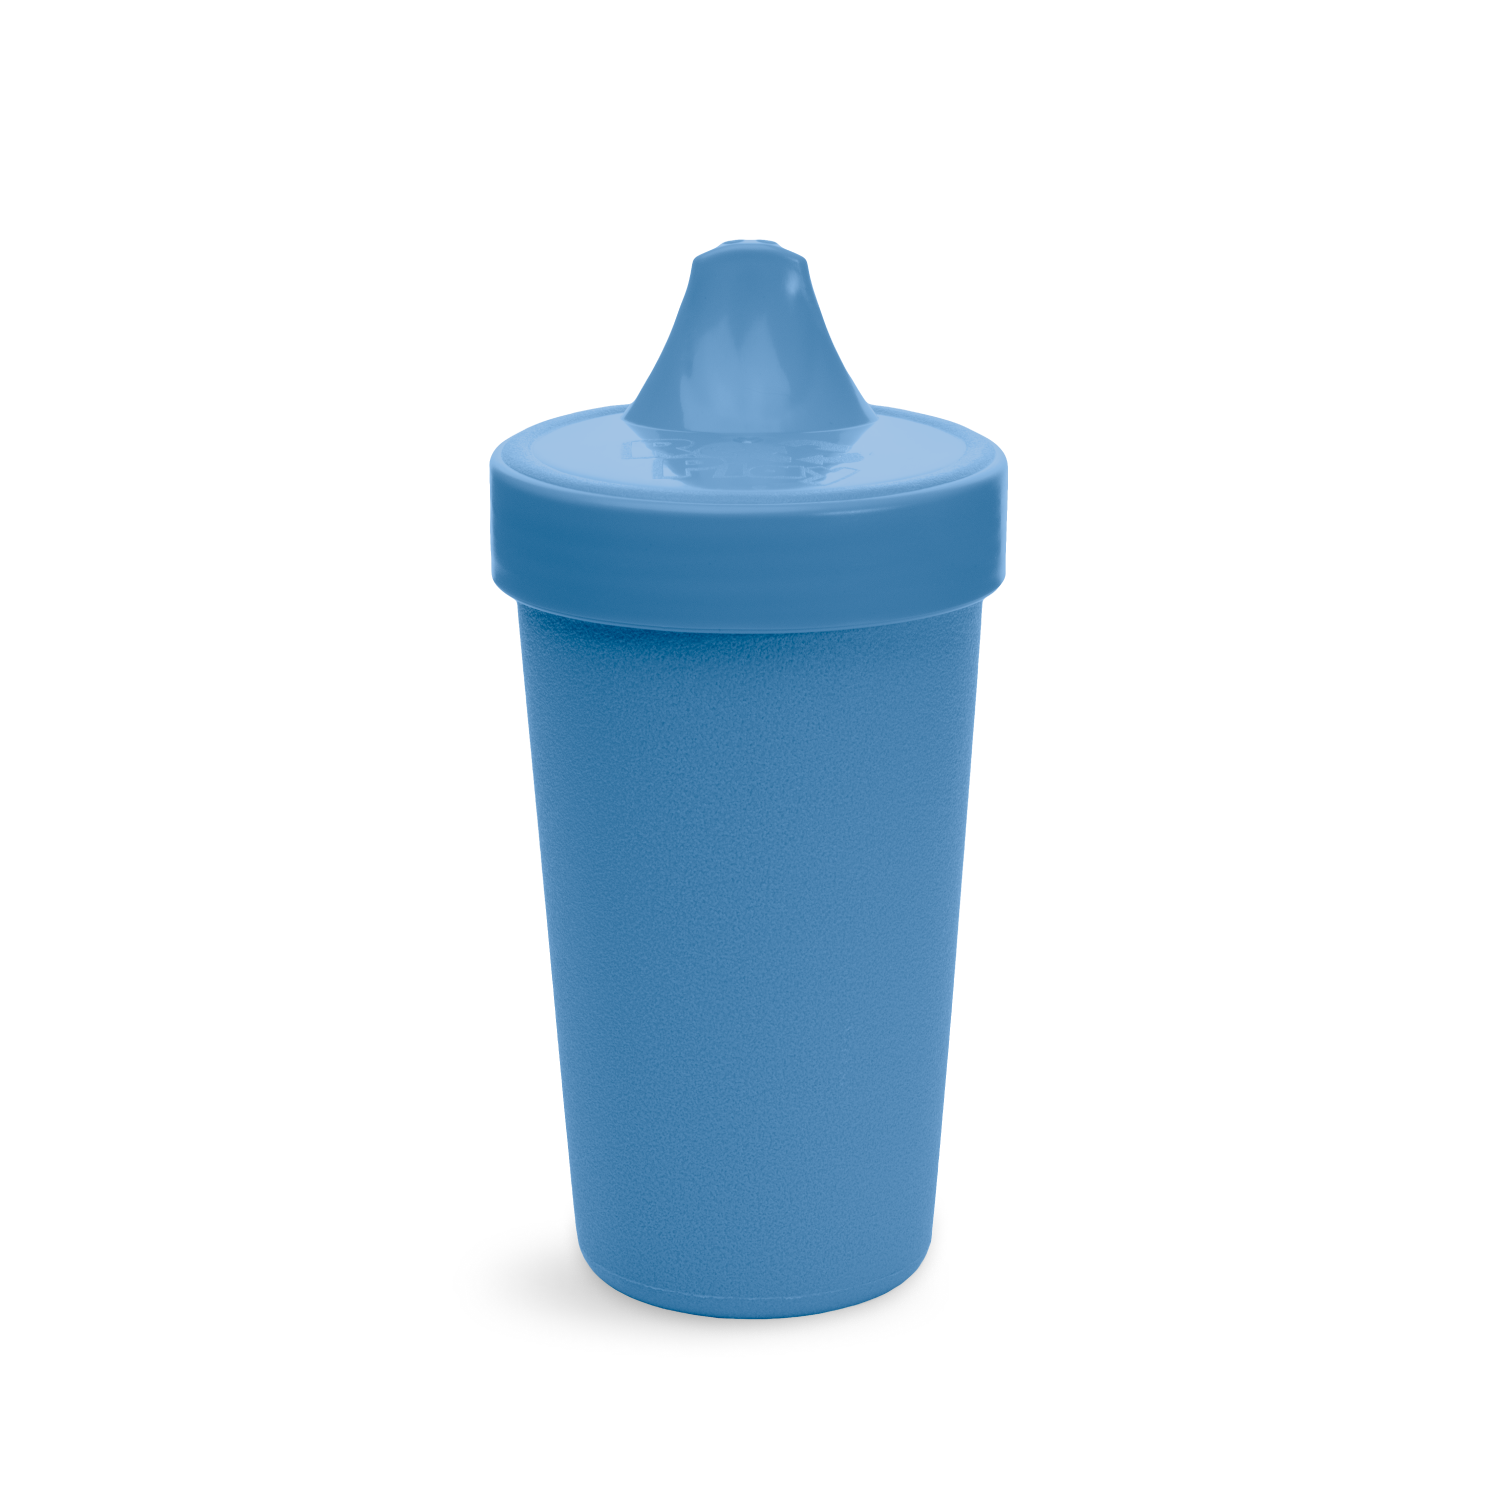 Re-Play Silicone Sippy Cups for Toddlers, 8 oz Kids Cups No Spill Cup Aqua